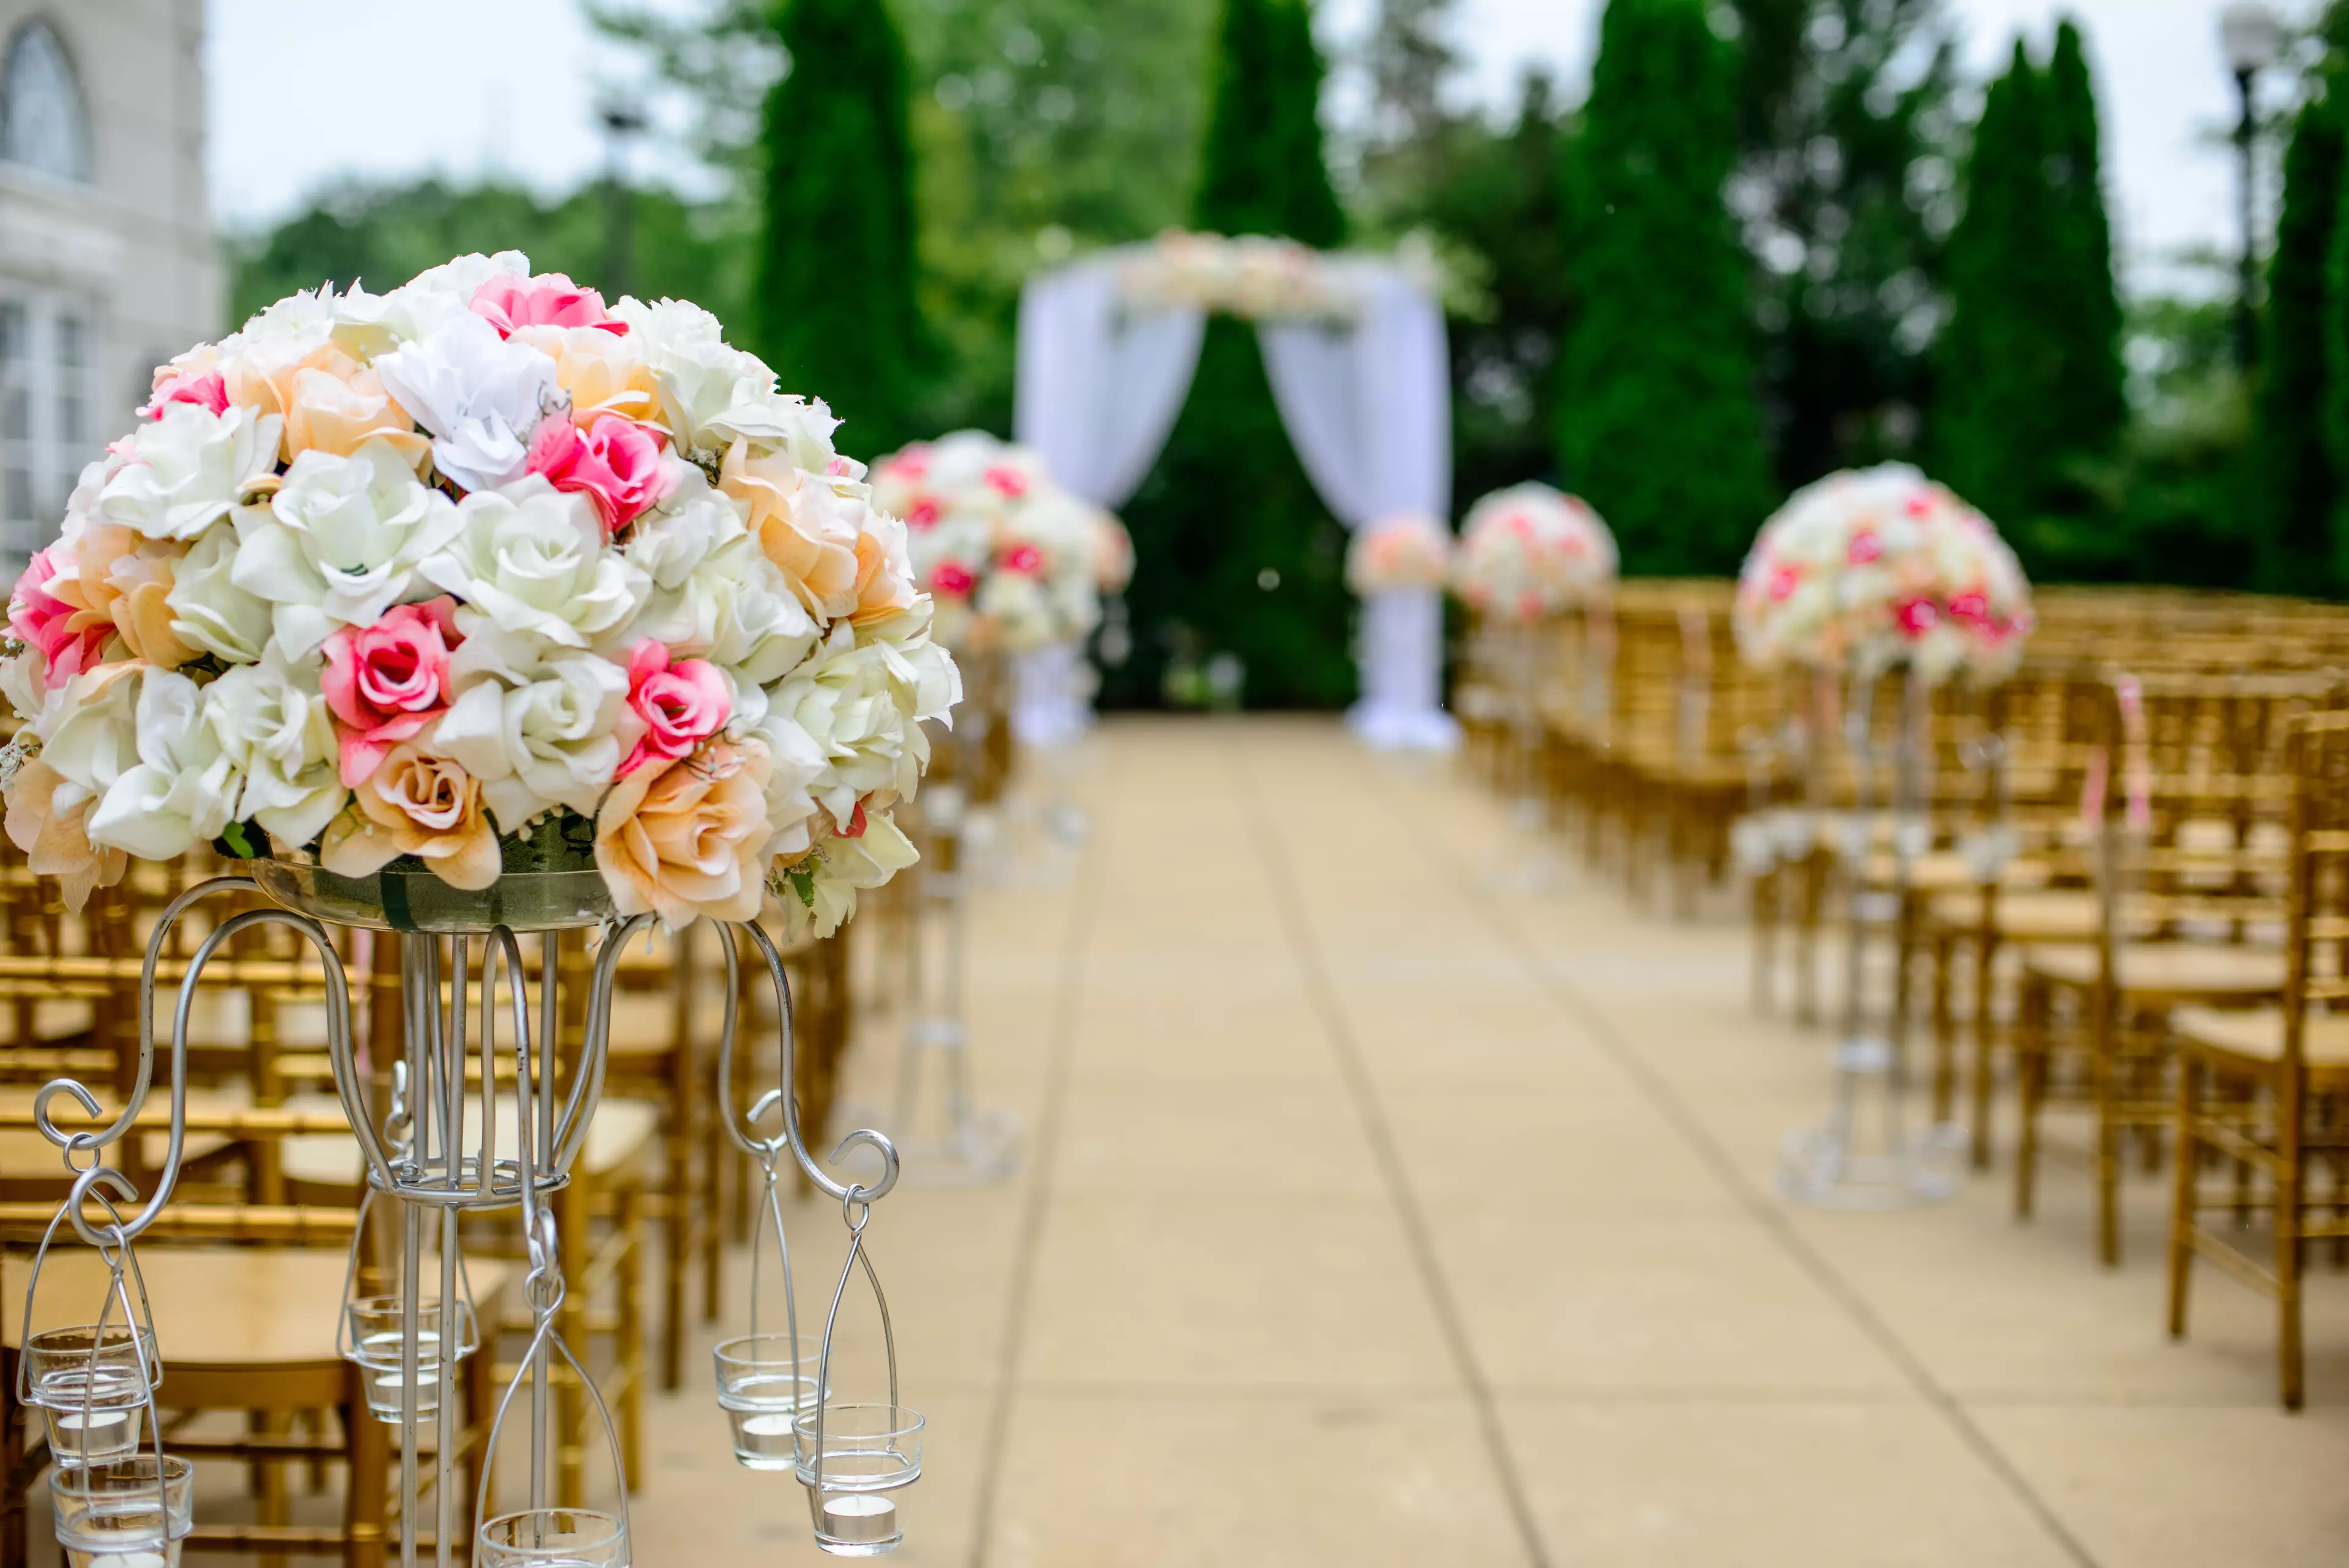 It has now been confirmed that wedding venues can host legal ceremonies from 12th April if licensed to do so (